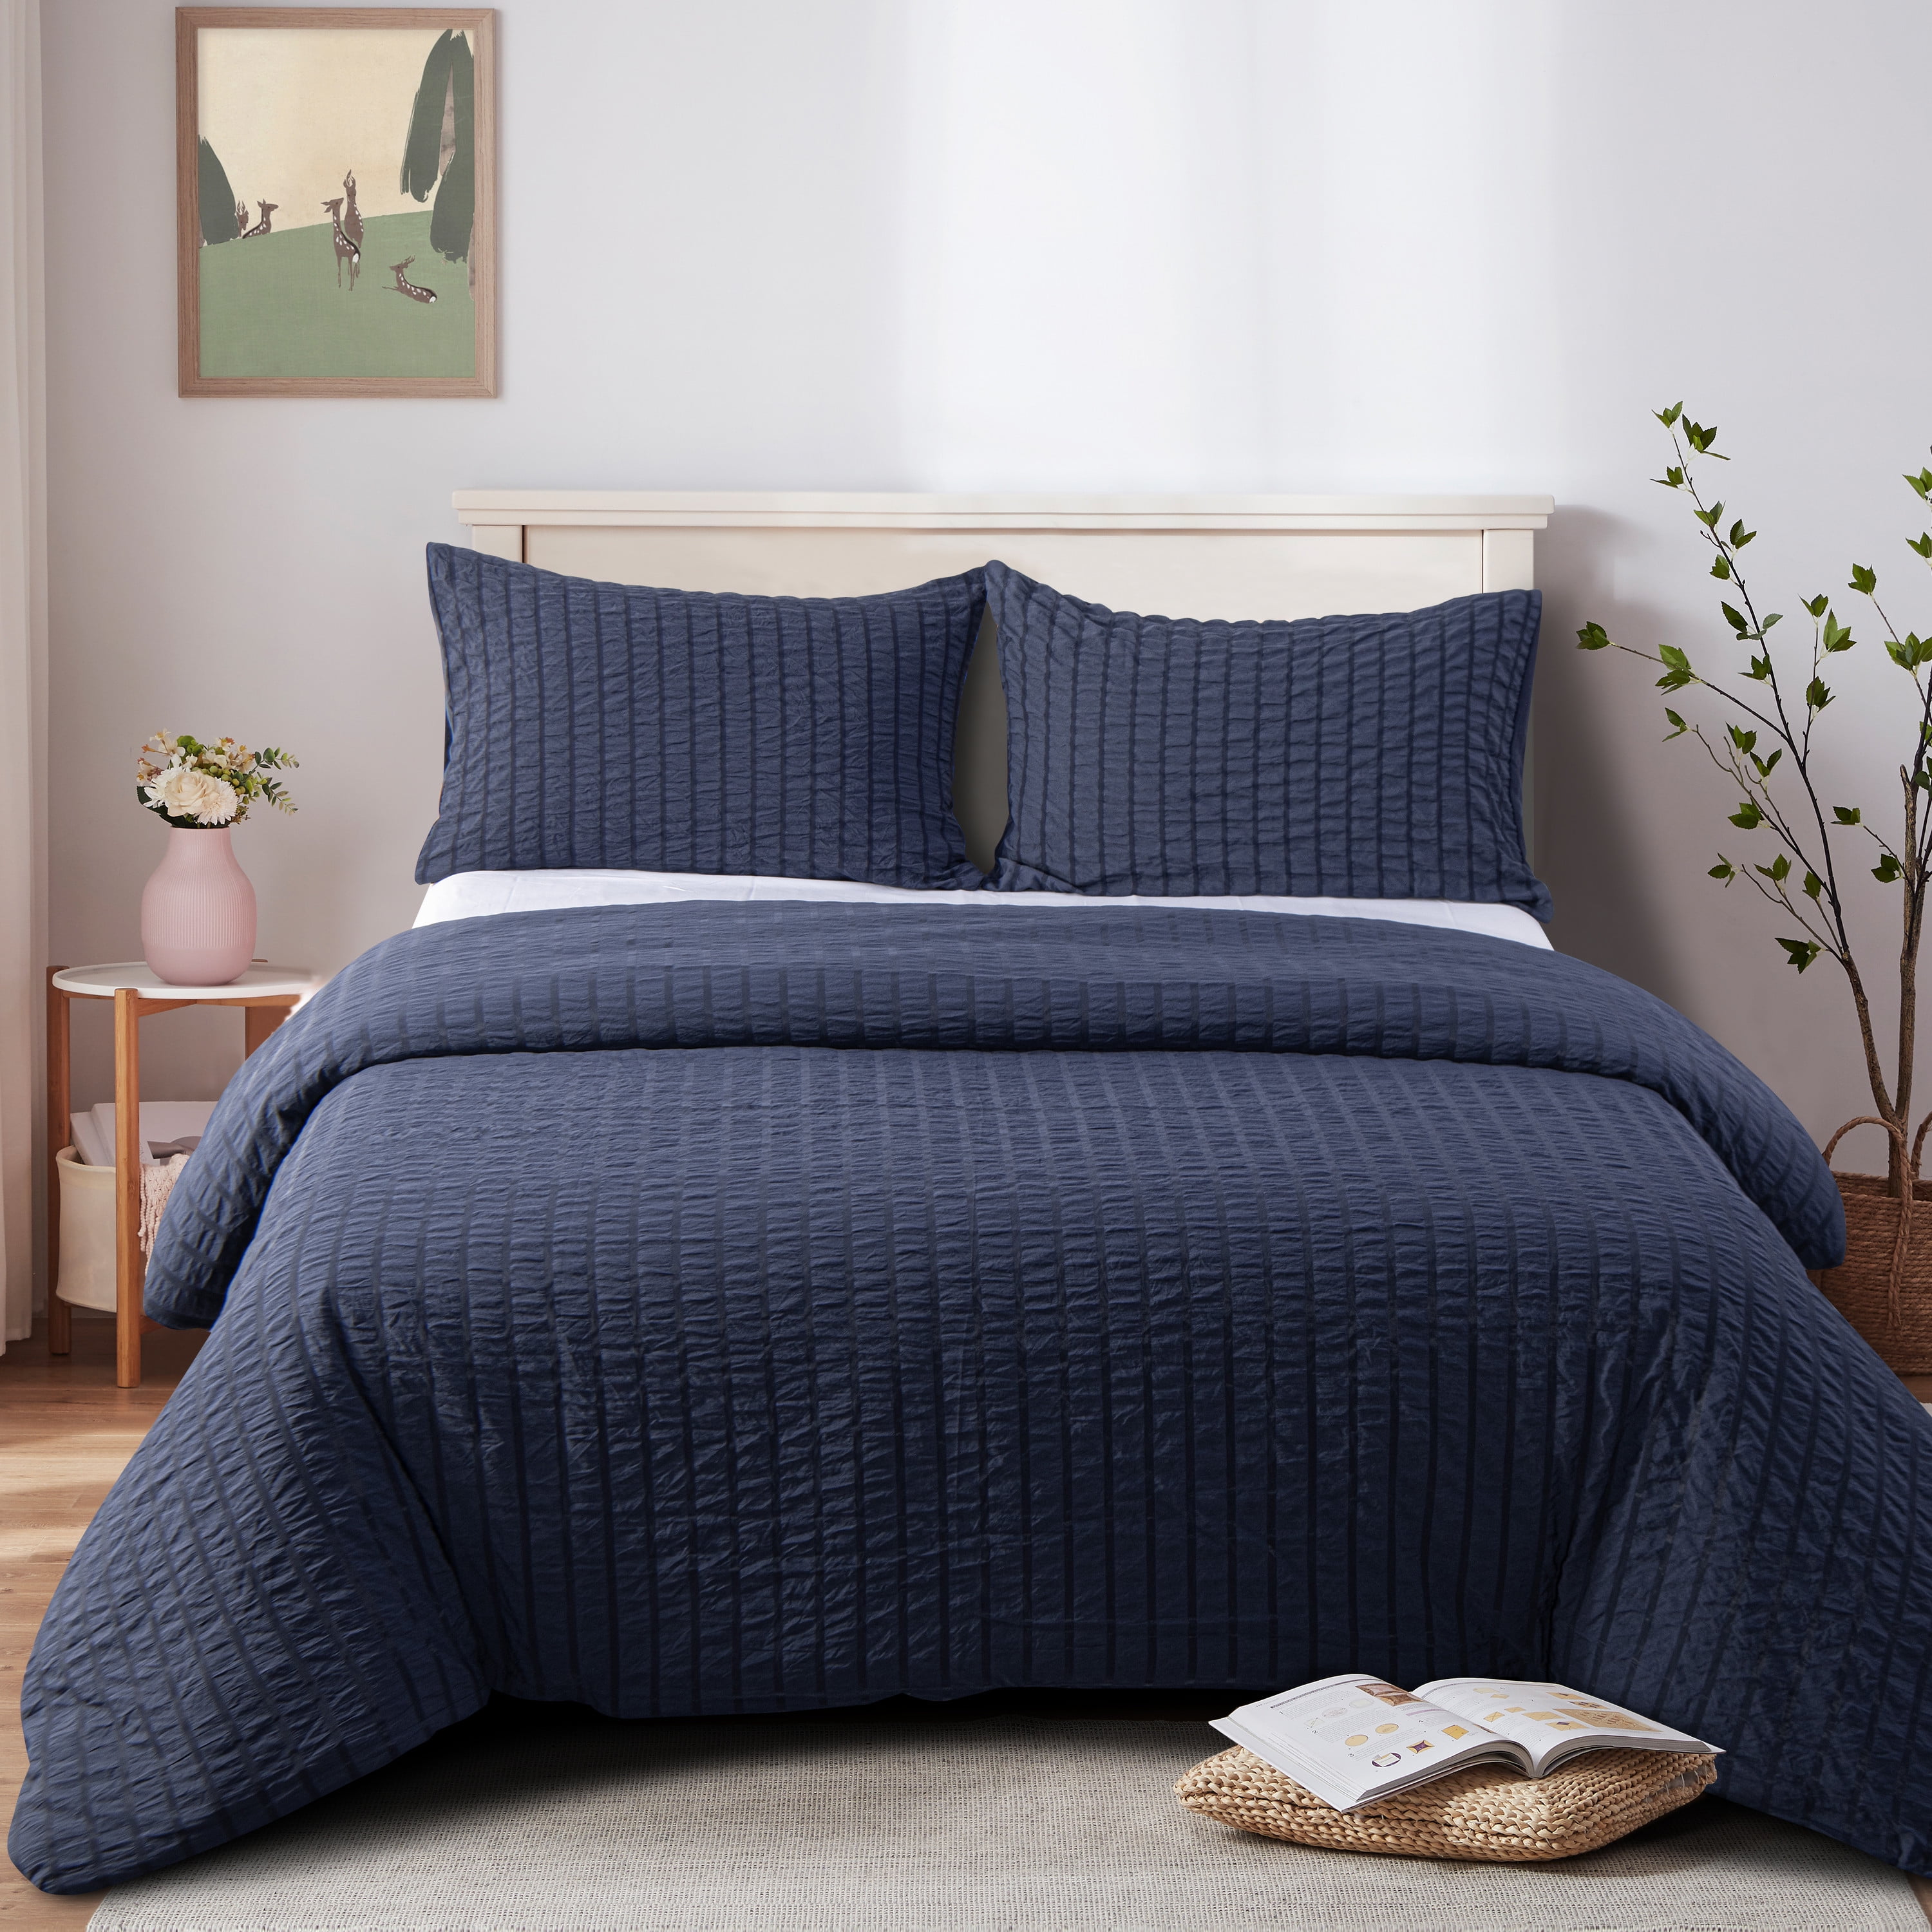 NTBAY 2 Piece Twin Textured Seersucker Duvet Cover Set with Hidden Zipper  Closure and Corner Ties, Breathable and Ultra Soft, Navy Blue 